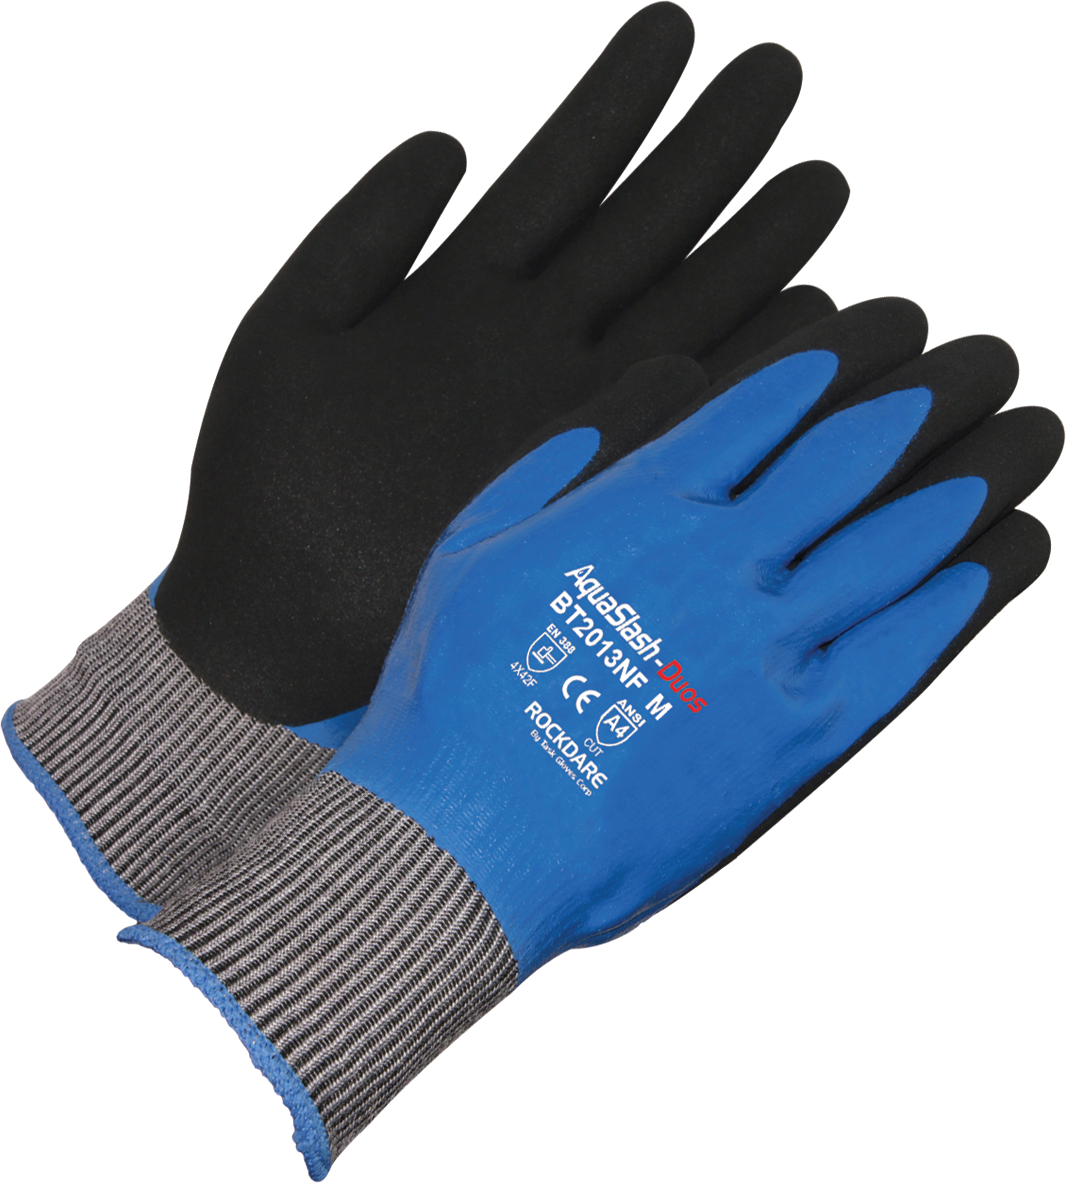 Task Gloves- HDPE Shell, fully coated Nitrile with Black Sandy Nitrile palm Glove-eSafety Supplies, Inc